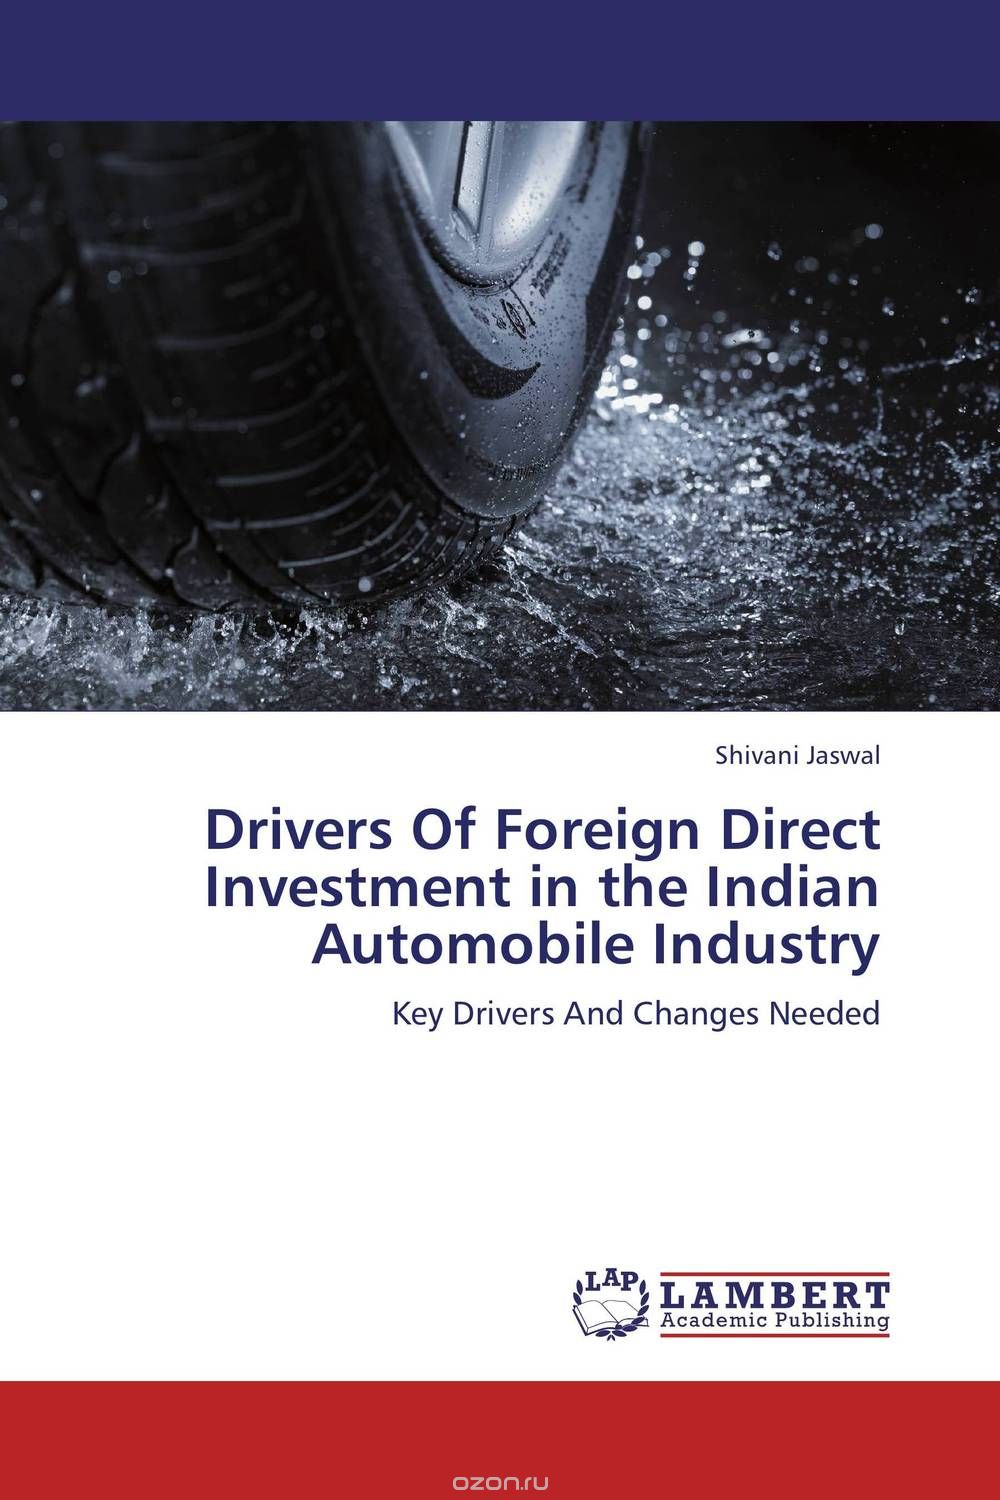 Скачать книгу "Drivers Of Foreign Direct Investment in the Indian Automobile Industry"